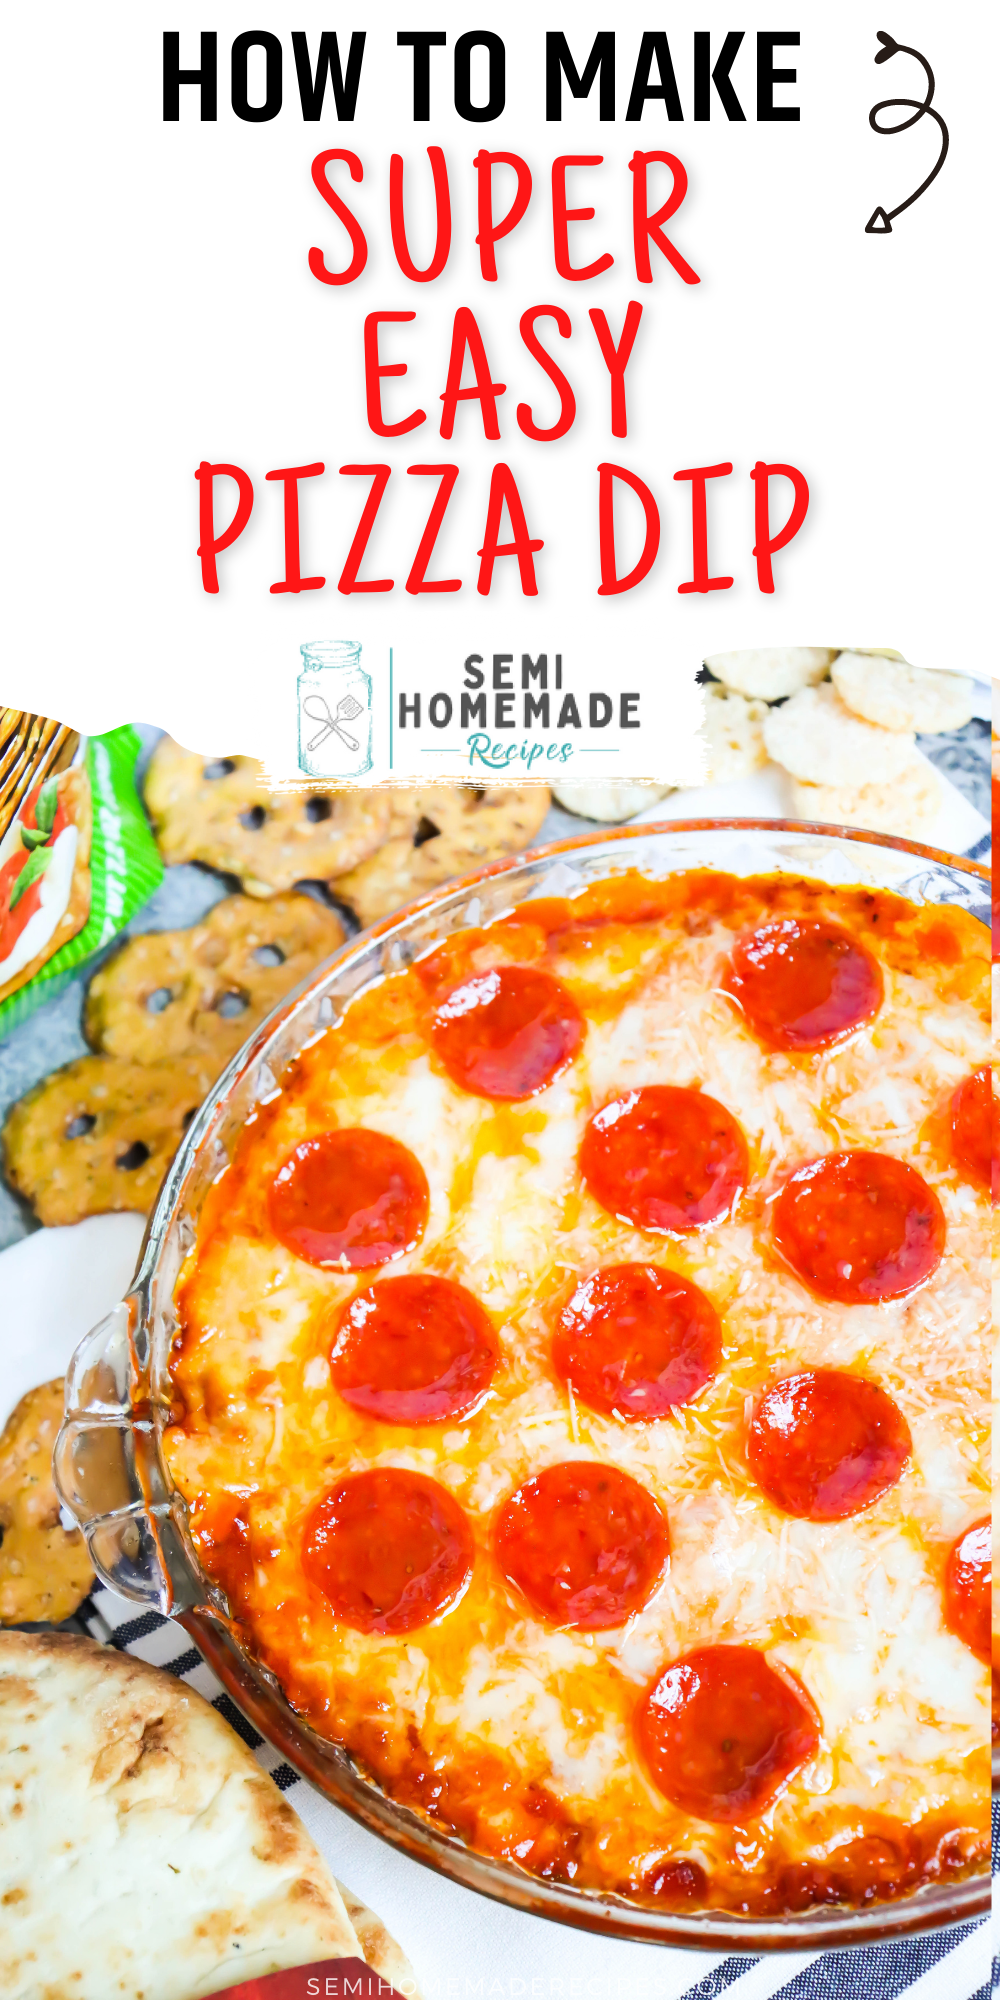 Pizza Dip – layers of cream cheese, parmesan cheese, mozzarella cheese and pizza sauce are topped with more cheese and pepperoni to make this easy pizza party dip! Perfect for serving with pretzels, naan bread, or crispy cheese wisps.

